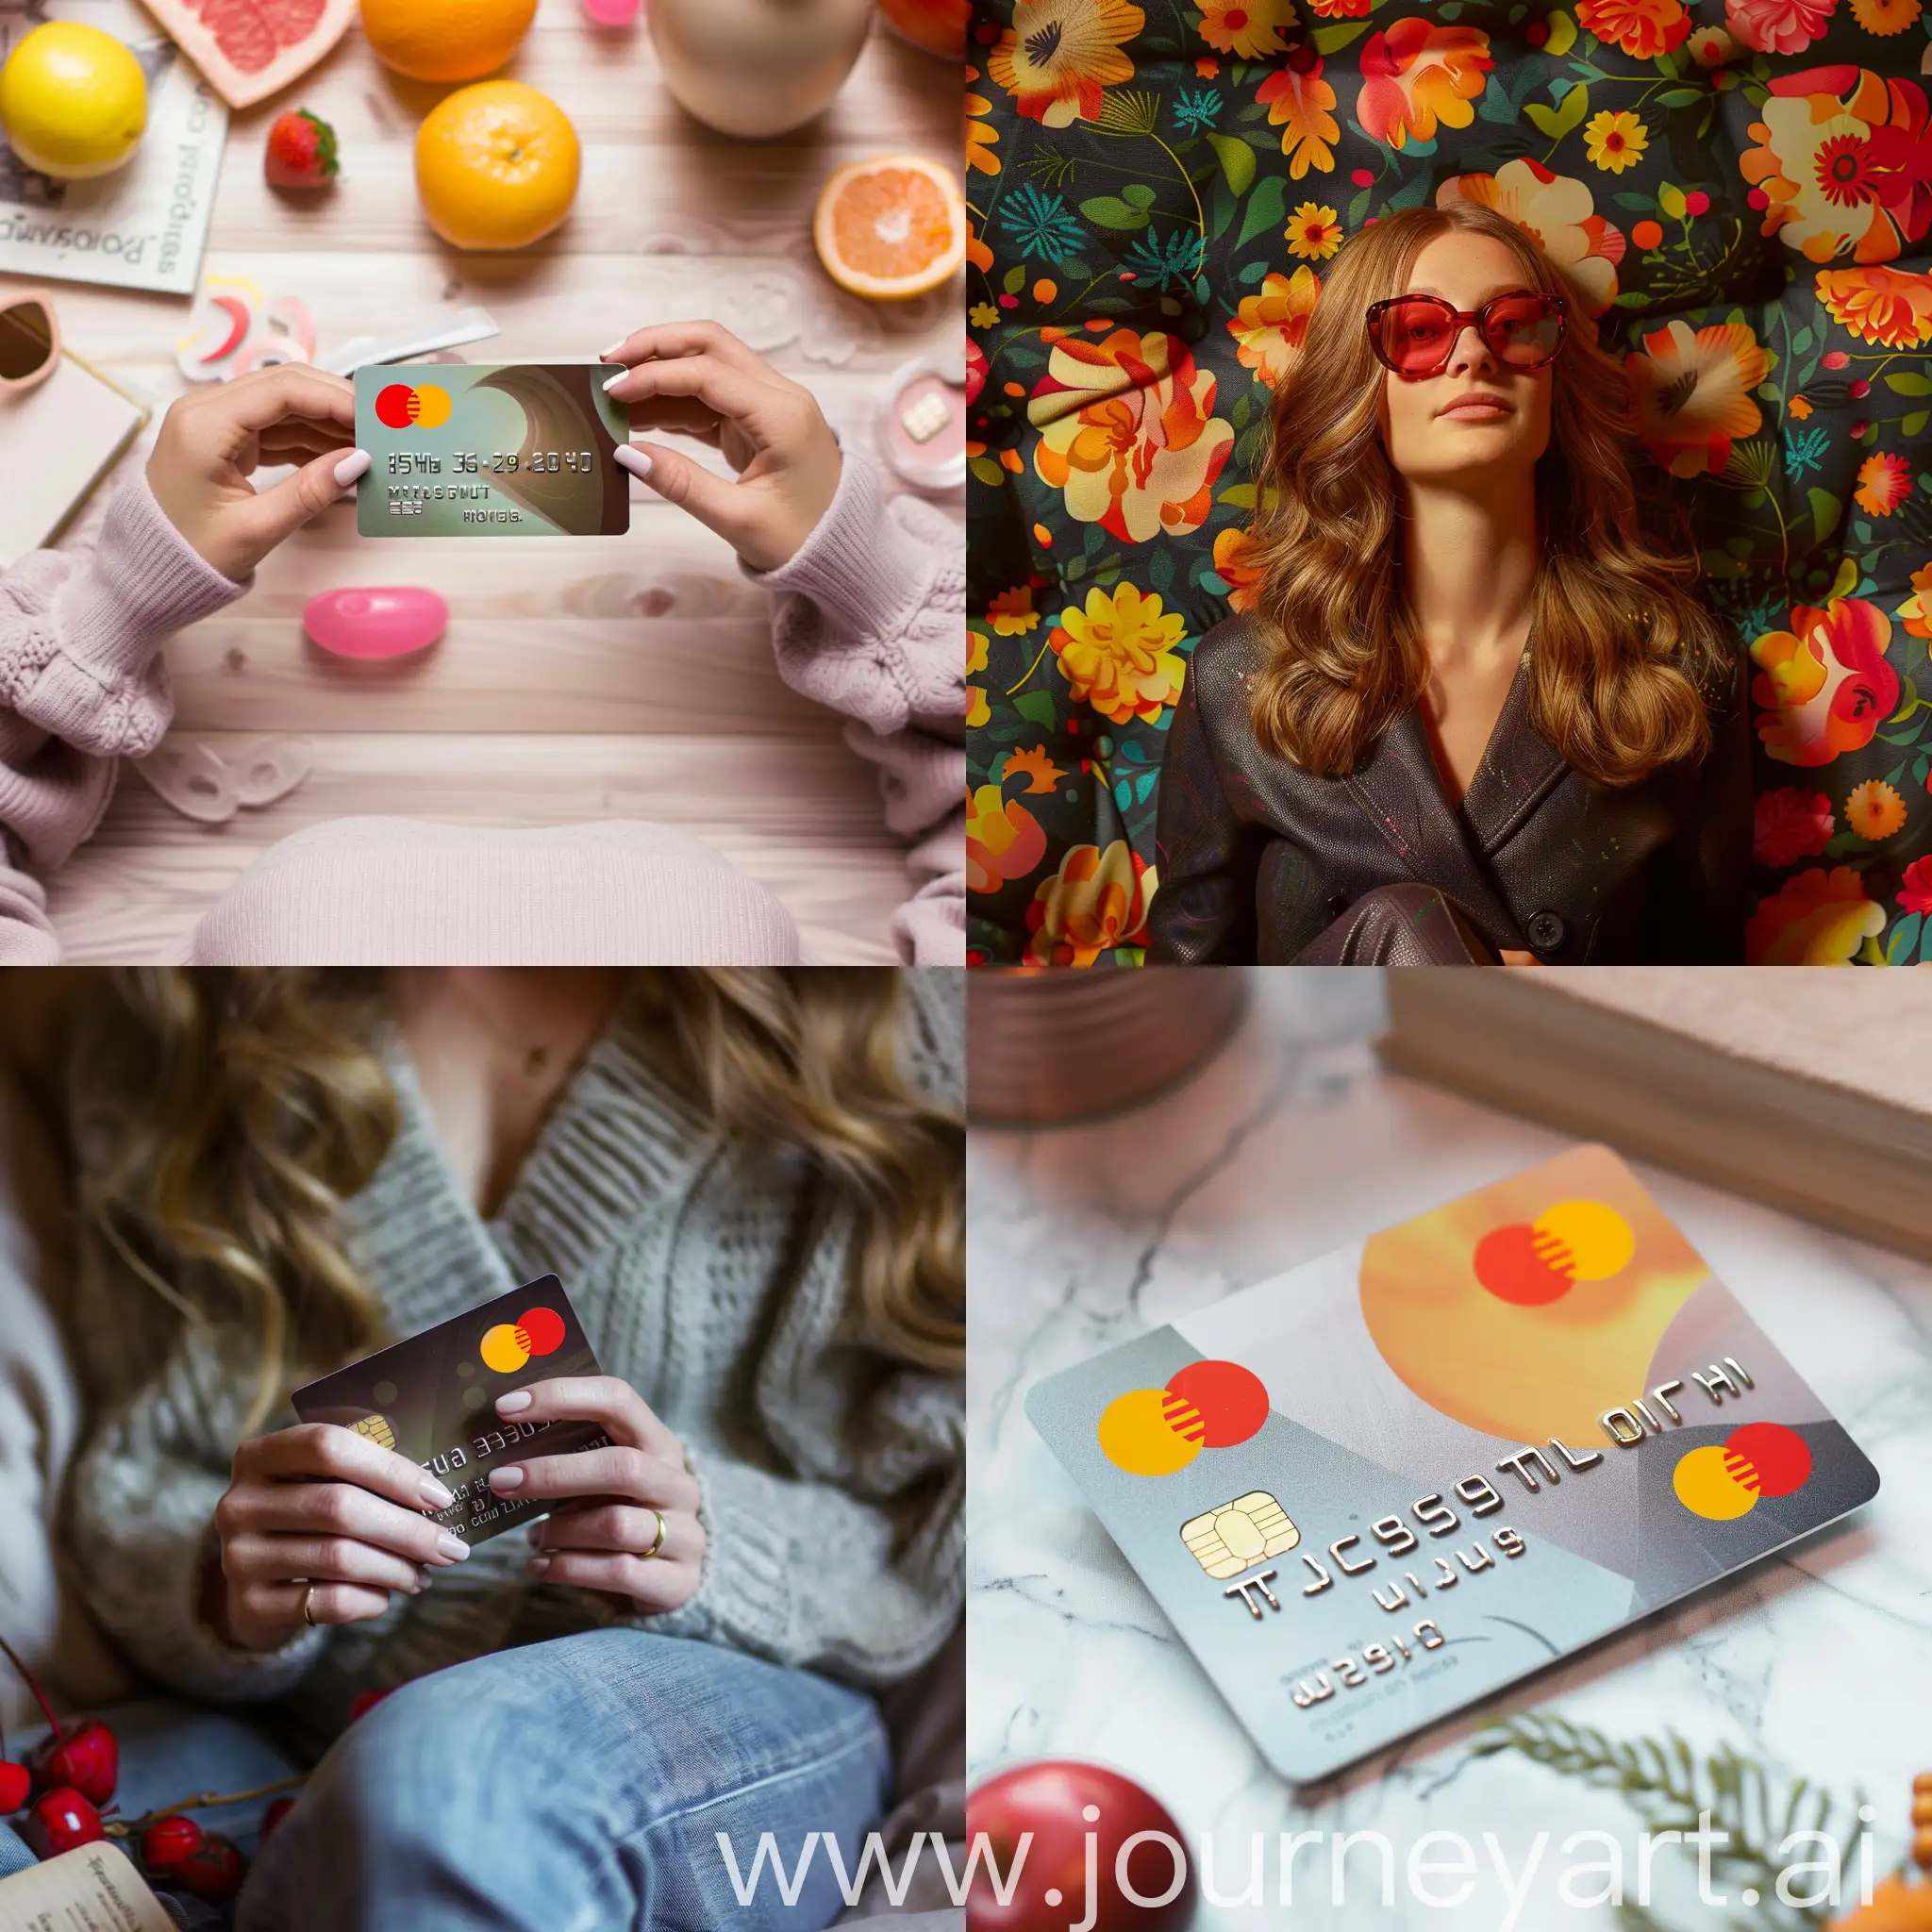 Mastercard-Mental-Wellbeing-and-Wellness-Offerings-Collage